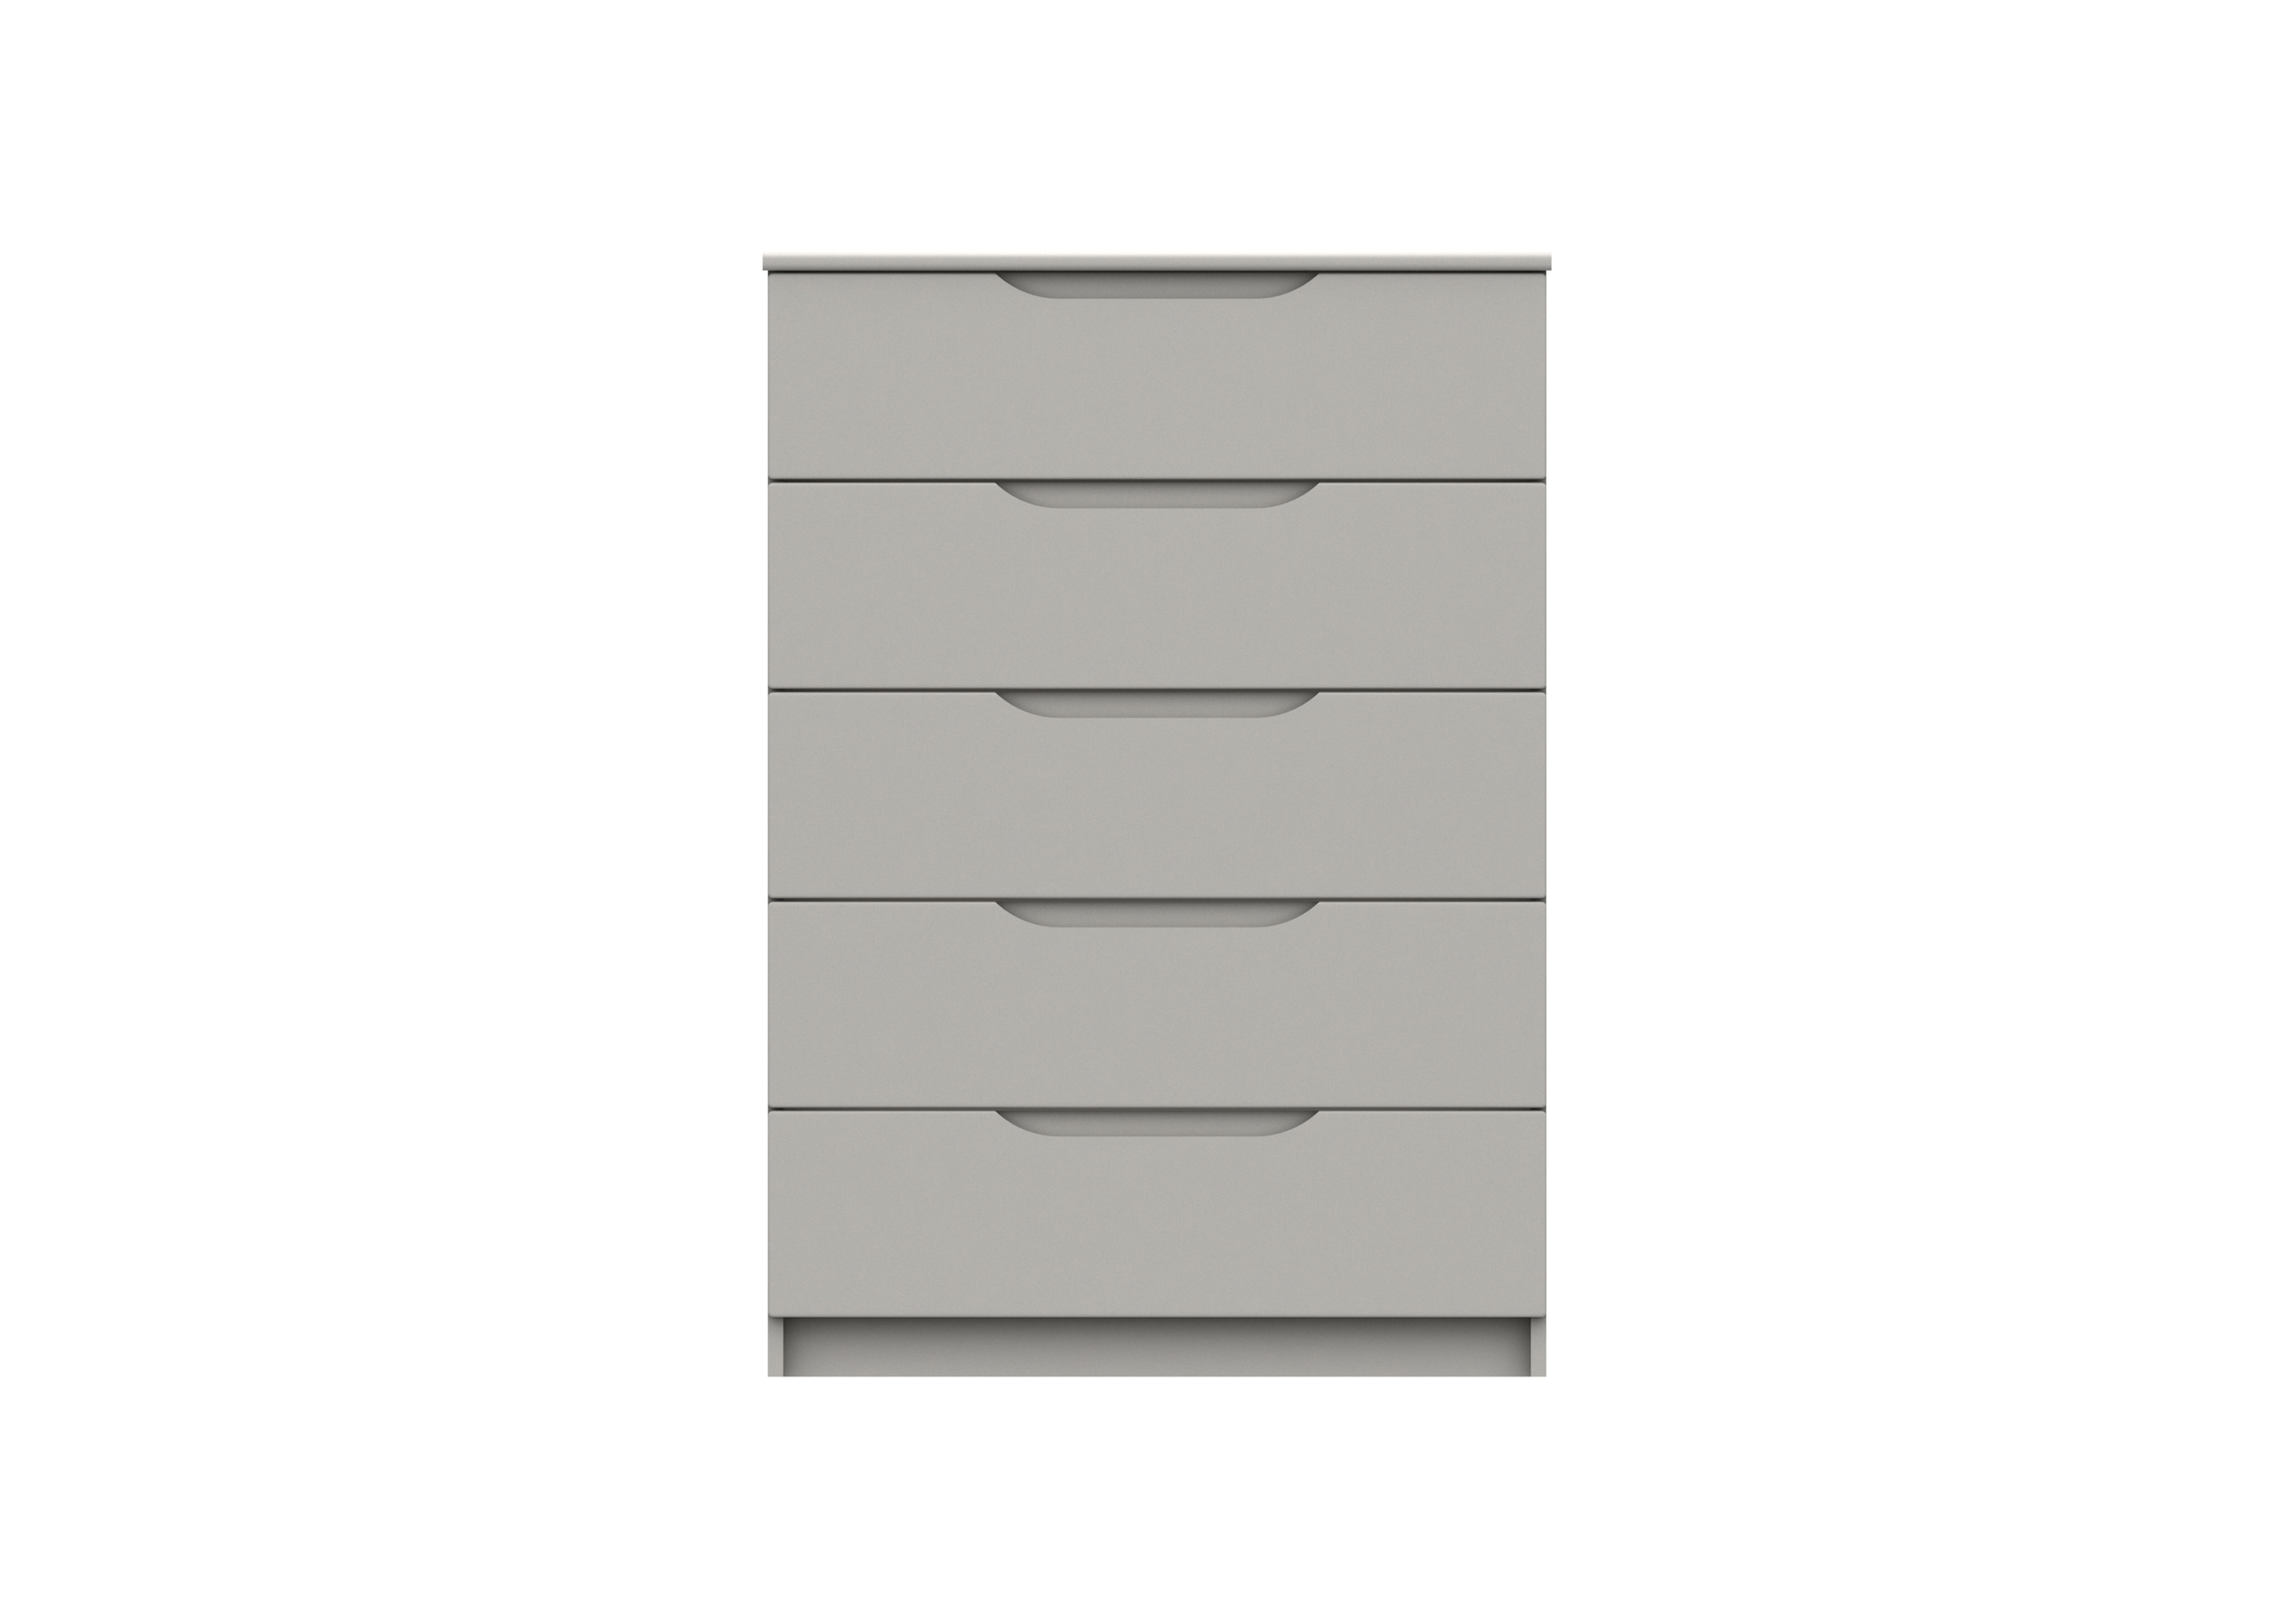 St Pancras 5 Drawer Chest in Light Grey Gloss on Furniture Village